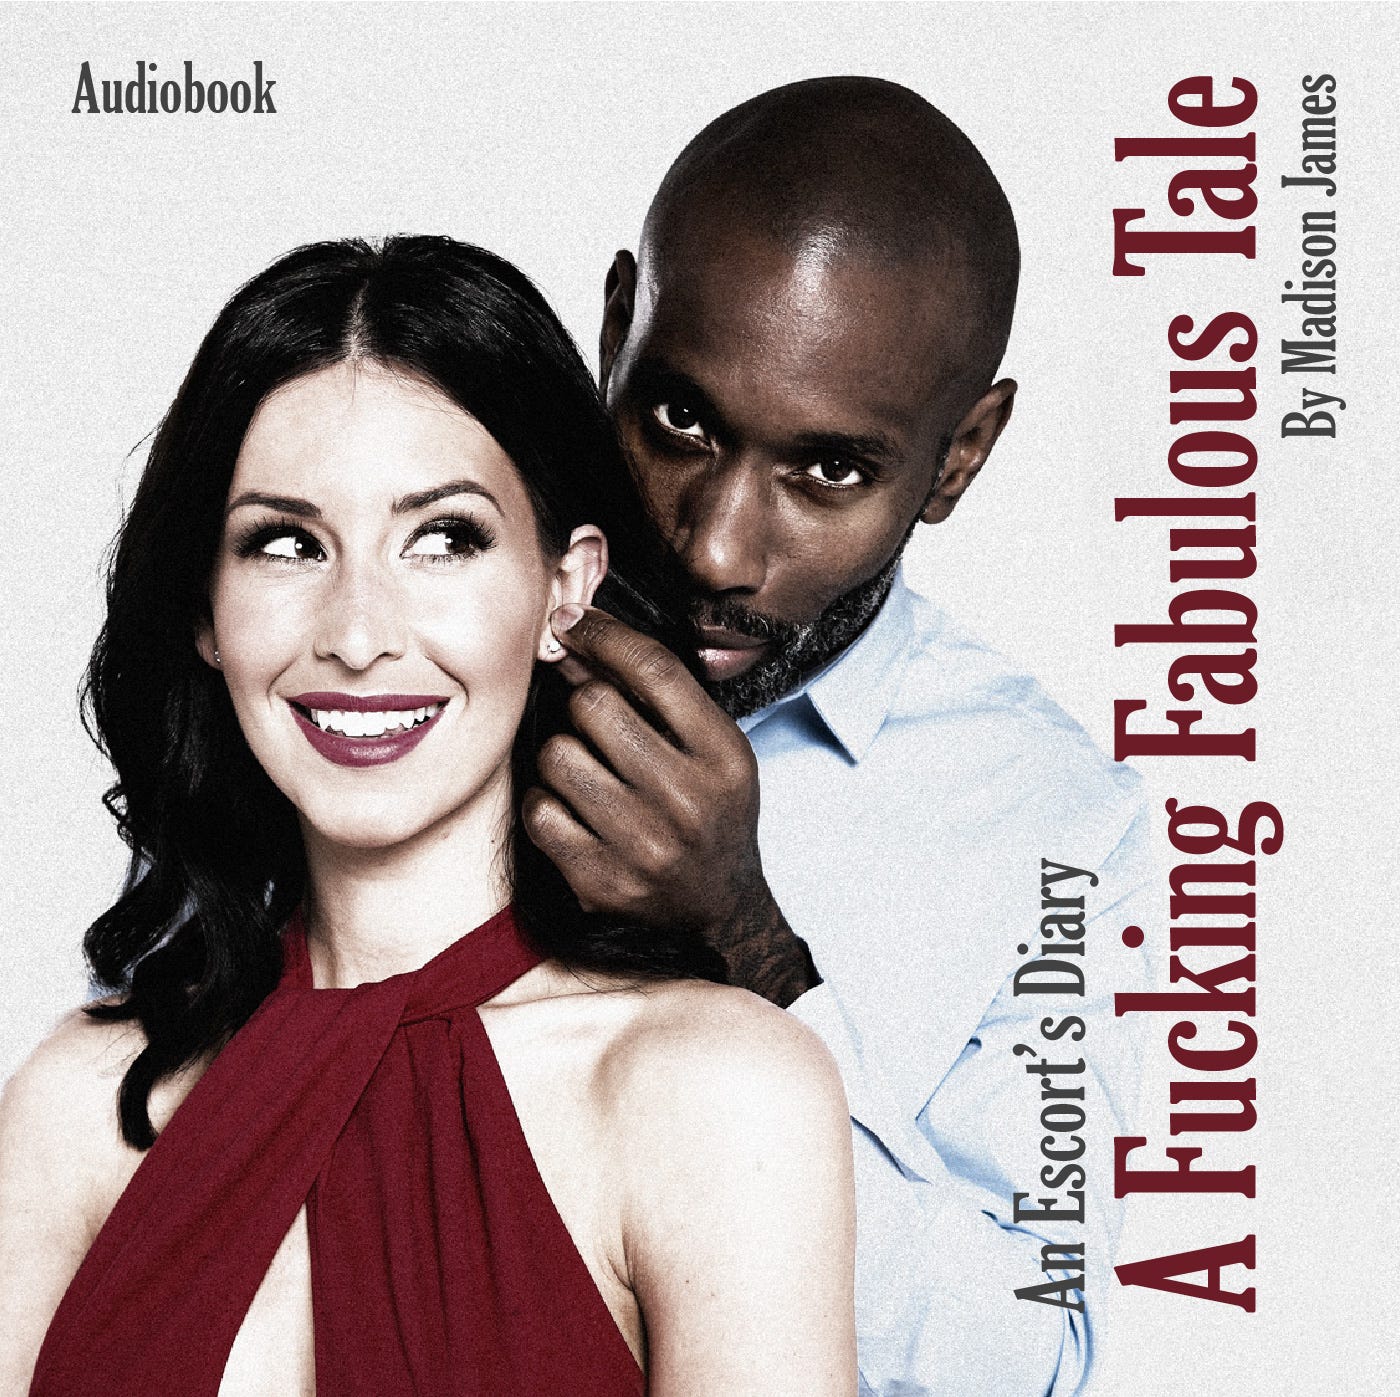 AUDIOBOOK An Escorts Diary A Fucking Fabulous Tale By Madison James by Madison James Medium